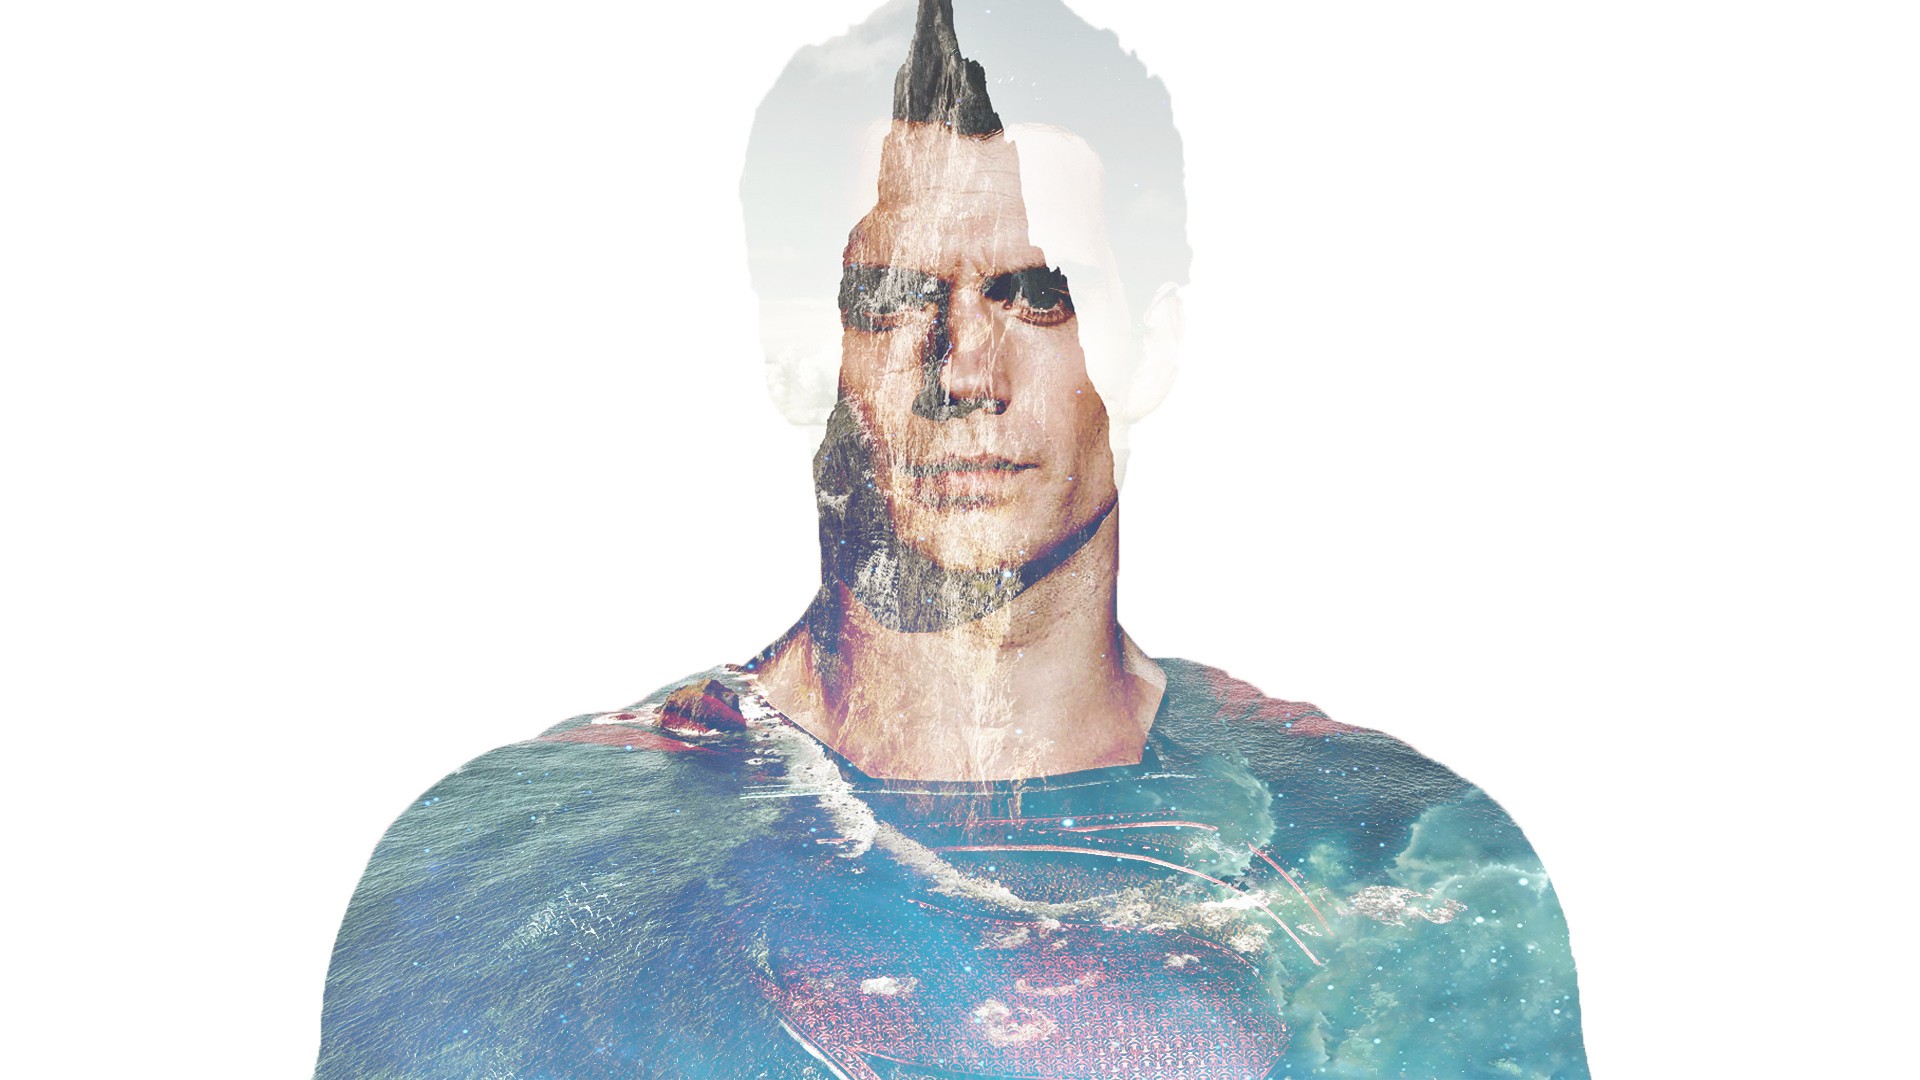 General 1920x1080 Superman mountains water faded superhero movies Henry Cavill digital art white background simple background